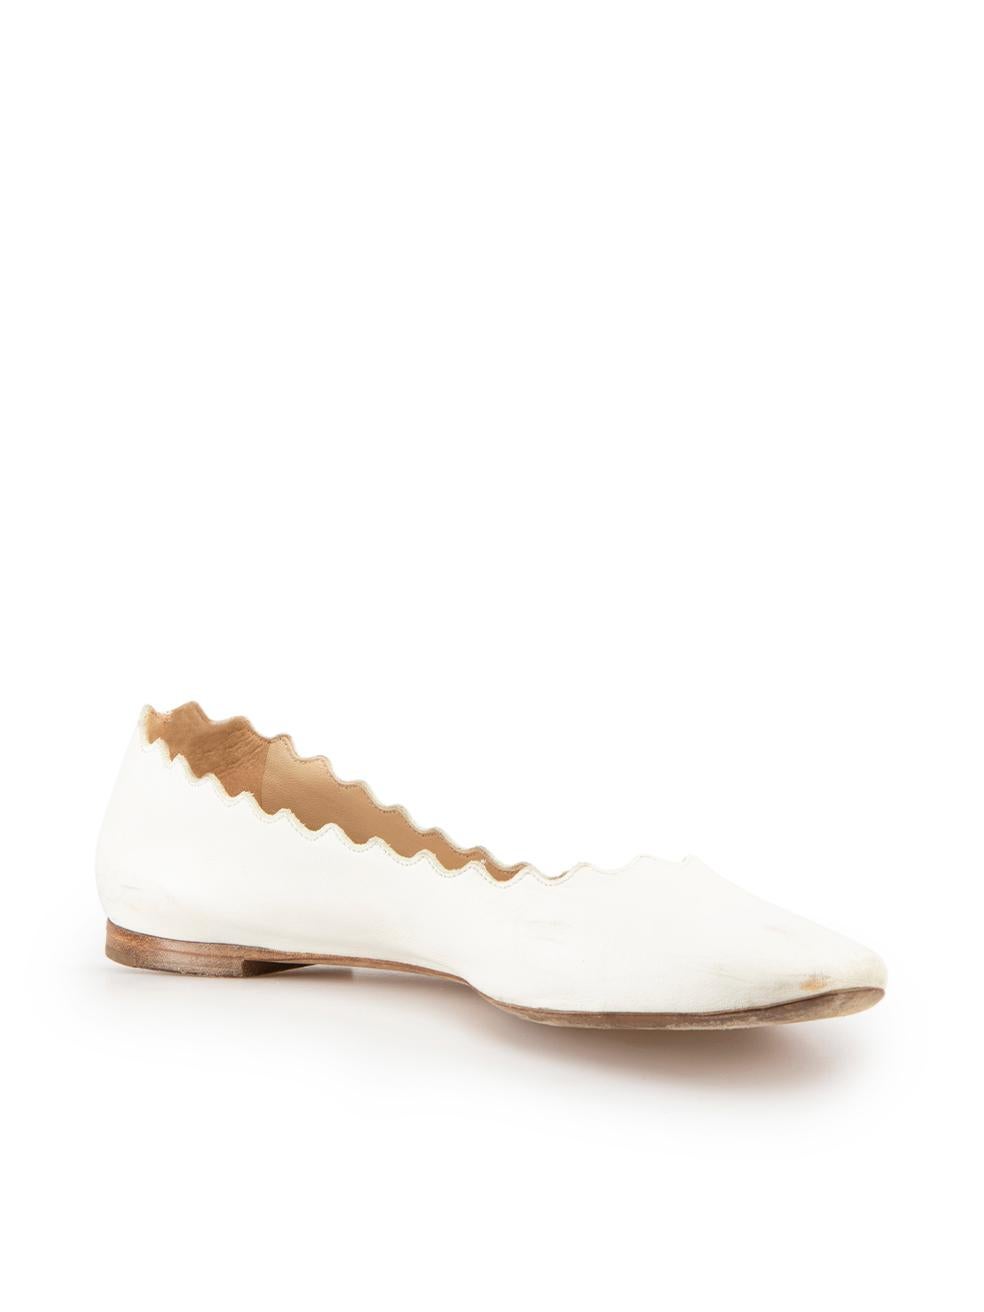 CONDITION is Good. General wear to shoes is evident. Moderate signs of wear to both sides, toes and heels of both shoes with discoloured marks and abrasions to the leather on this used Chloé designer resale item.
 
 Details
 White
 Leather
 Slip on